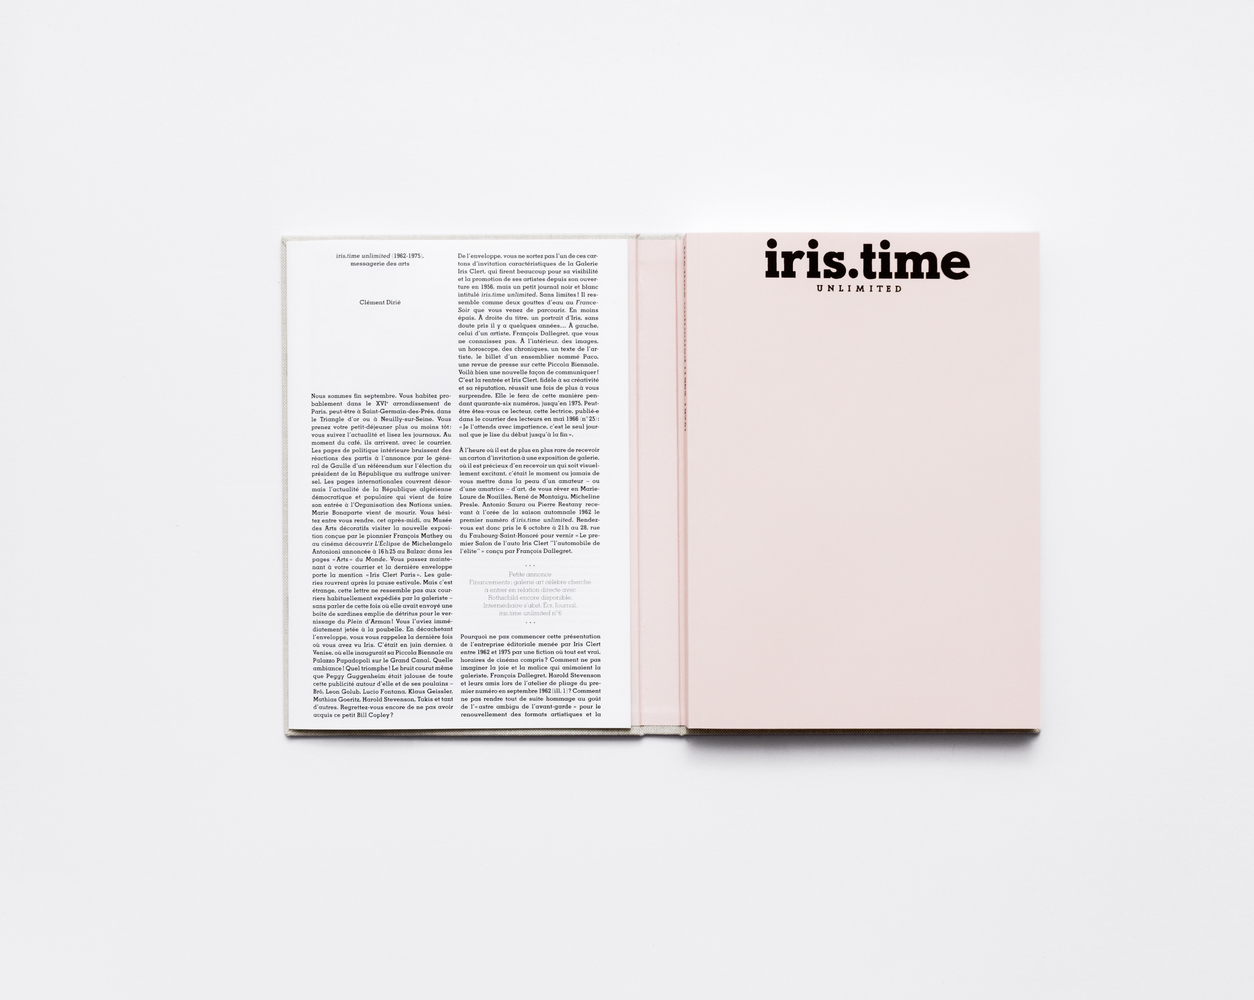 iris.time unlimited (1962-1975) -  